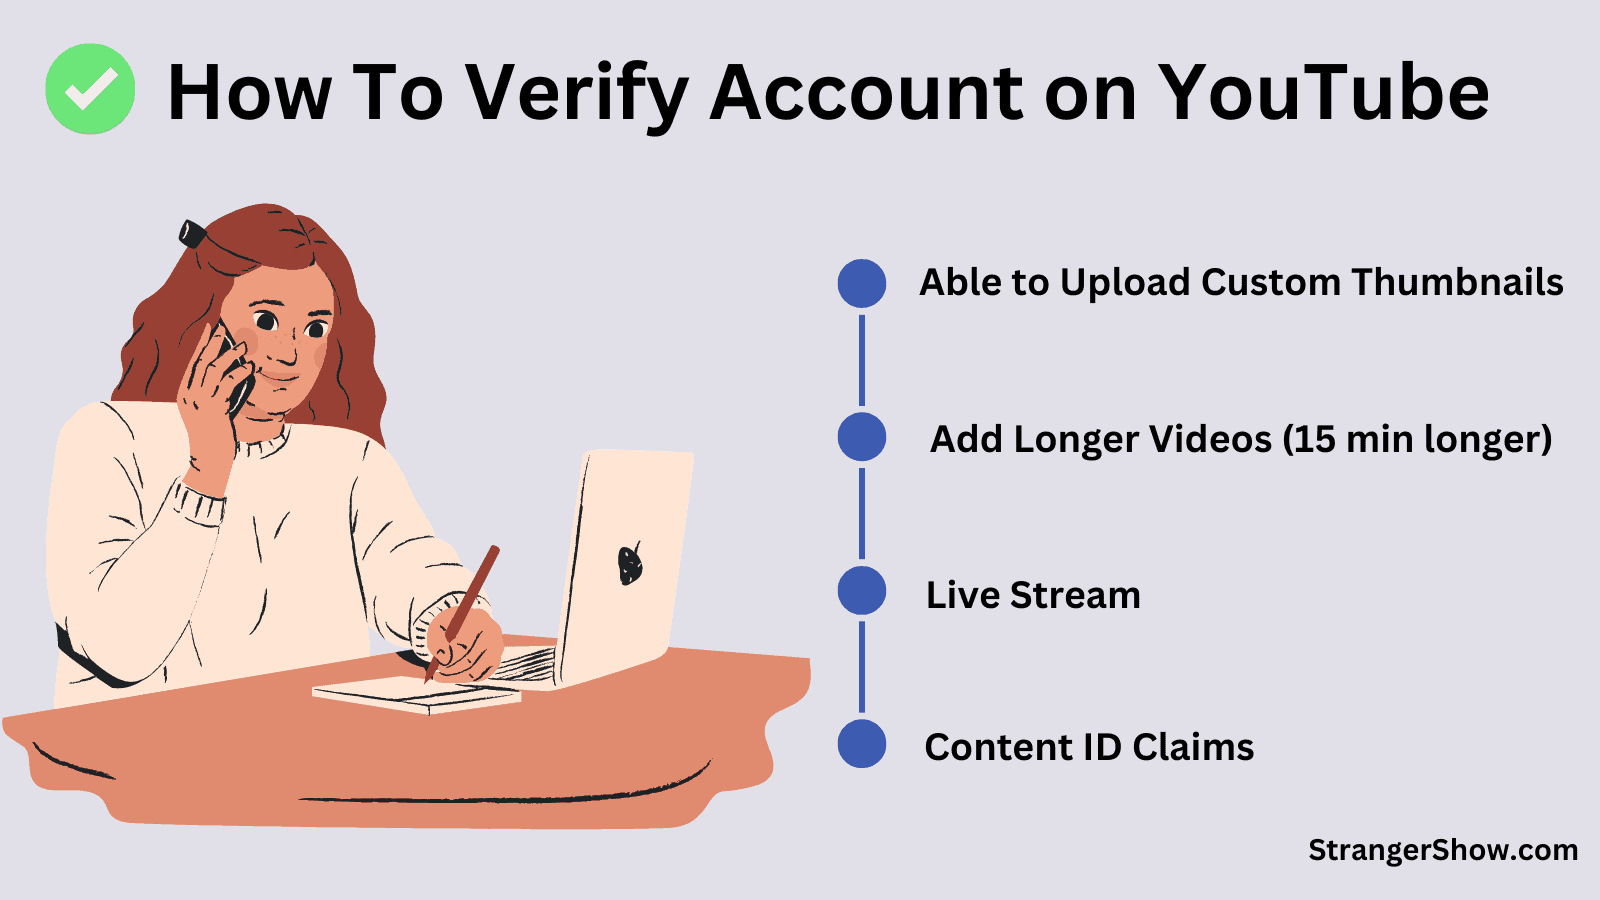 How to Verify Your Account on YouTube